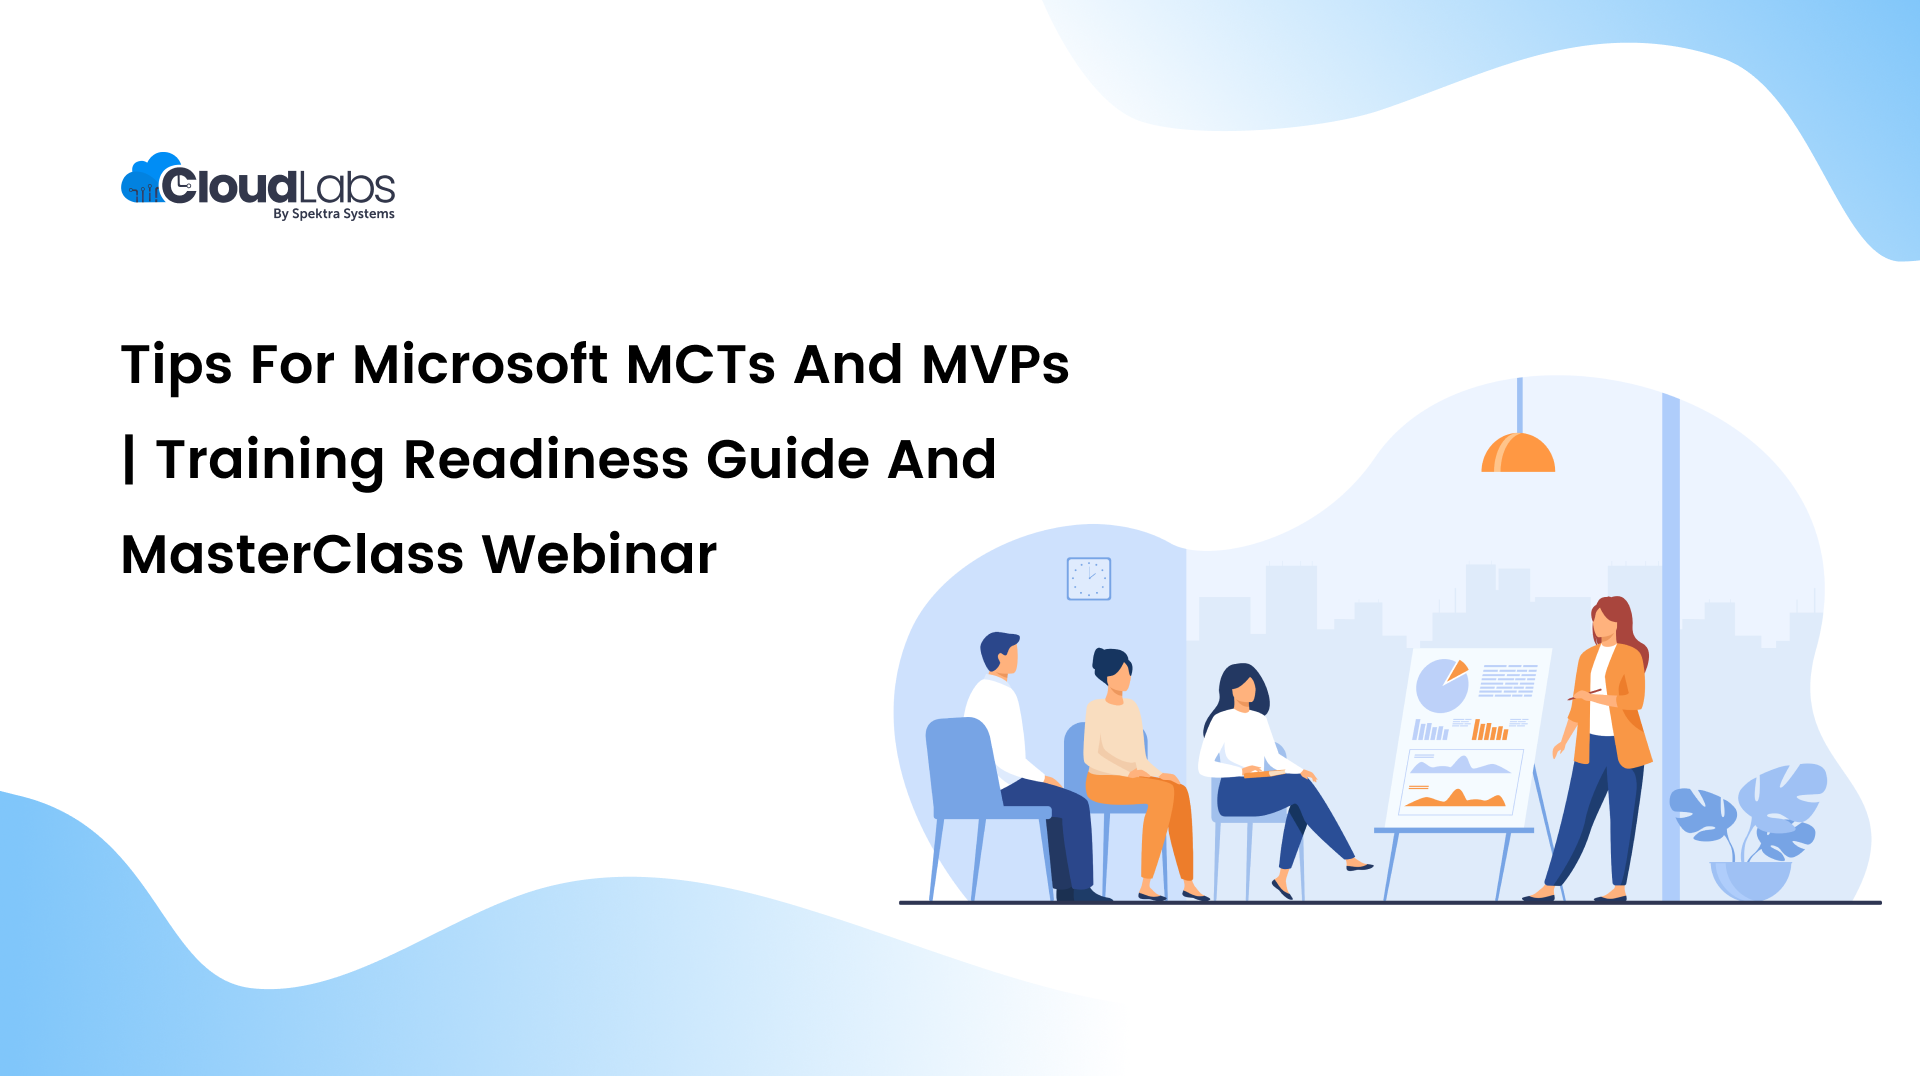 Tips for Microsoft MCTs and MVPs Training Readiness Guide and MasterClass Webinar